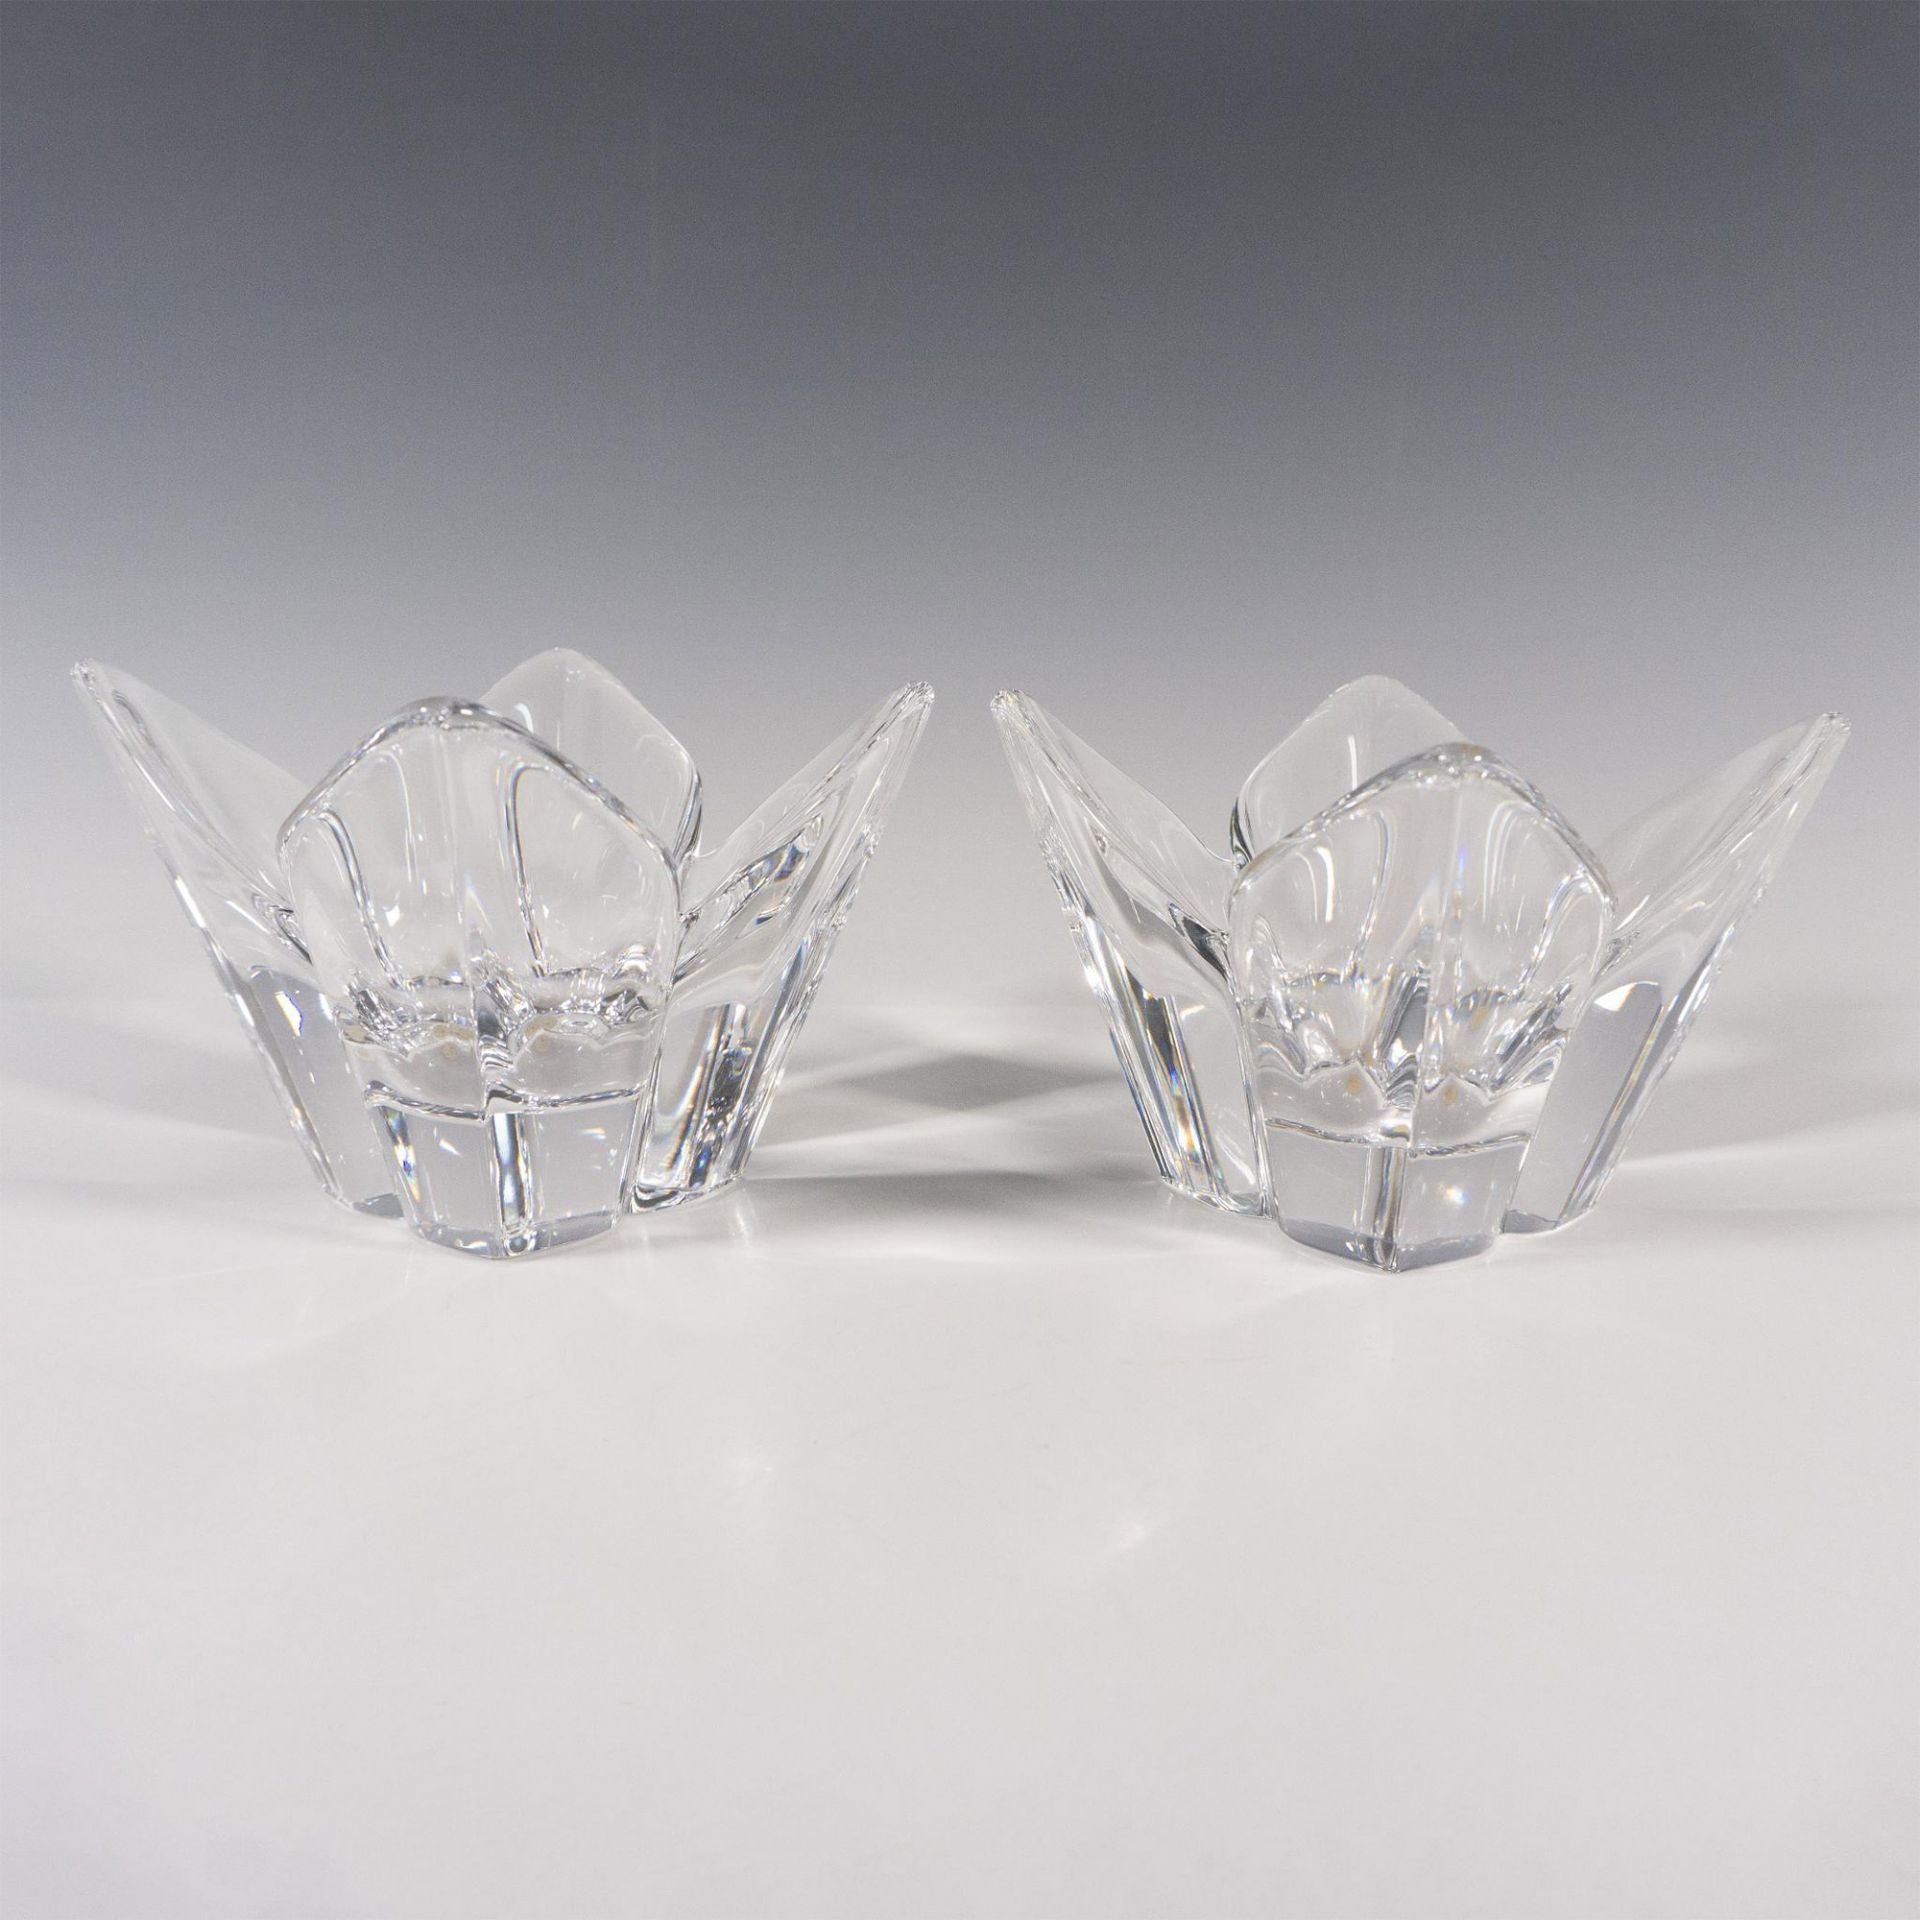 Pair of Orrefors Crystal Candle Holders, Lotus - Image 2 of 4